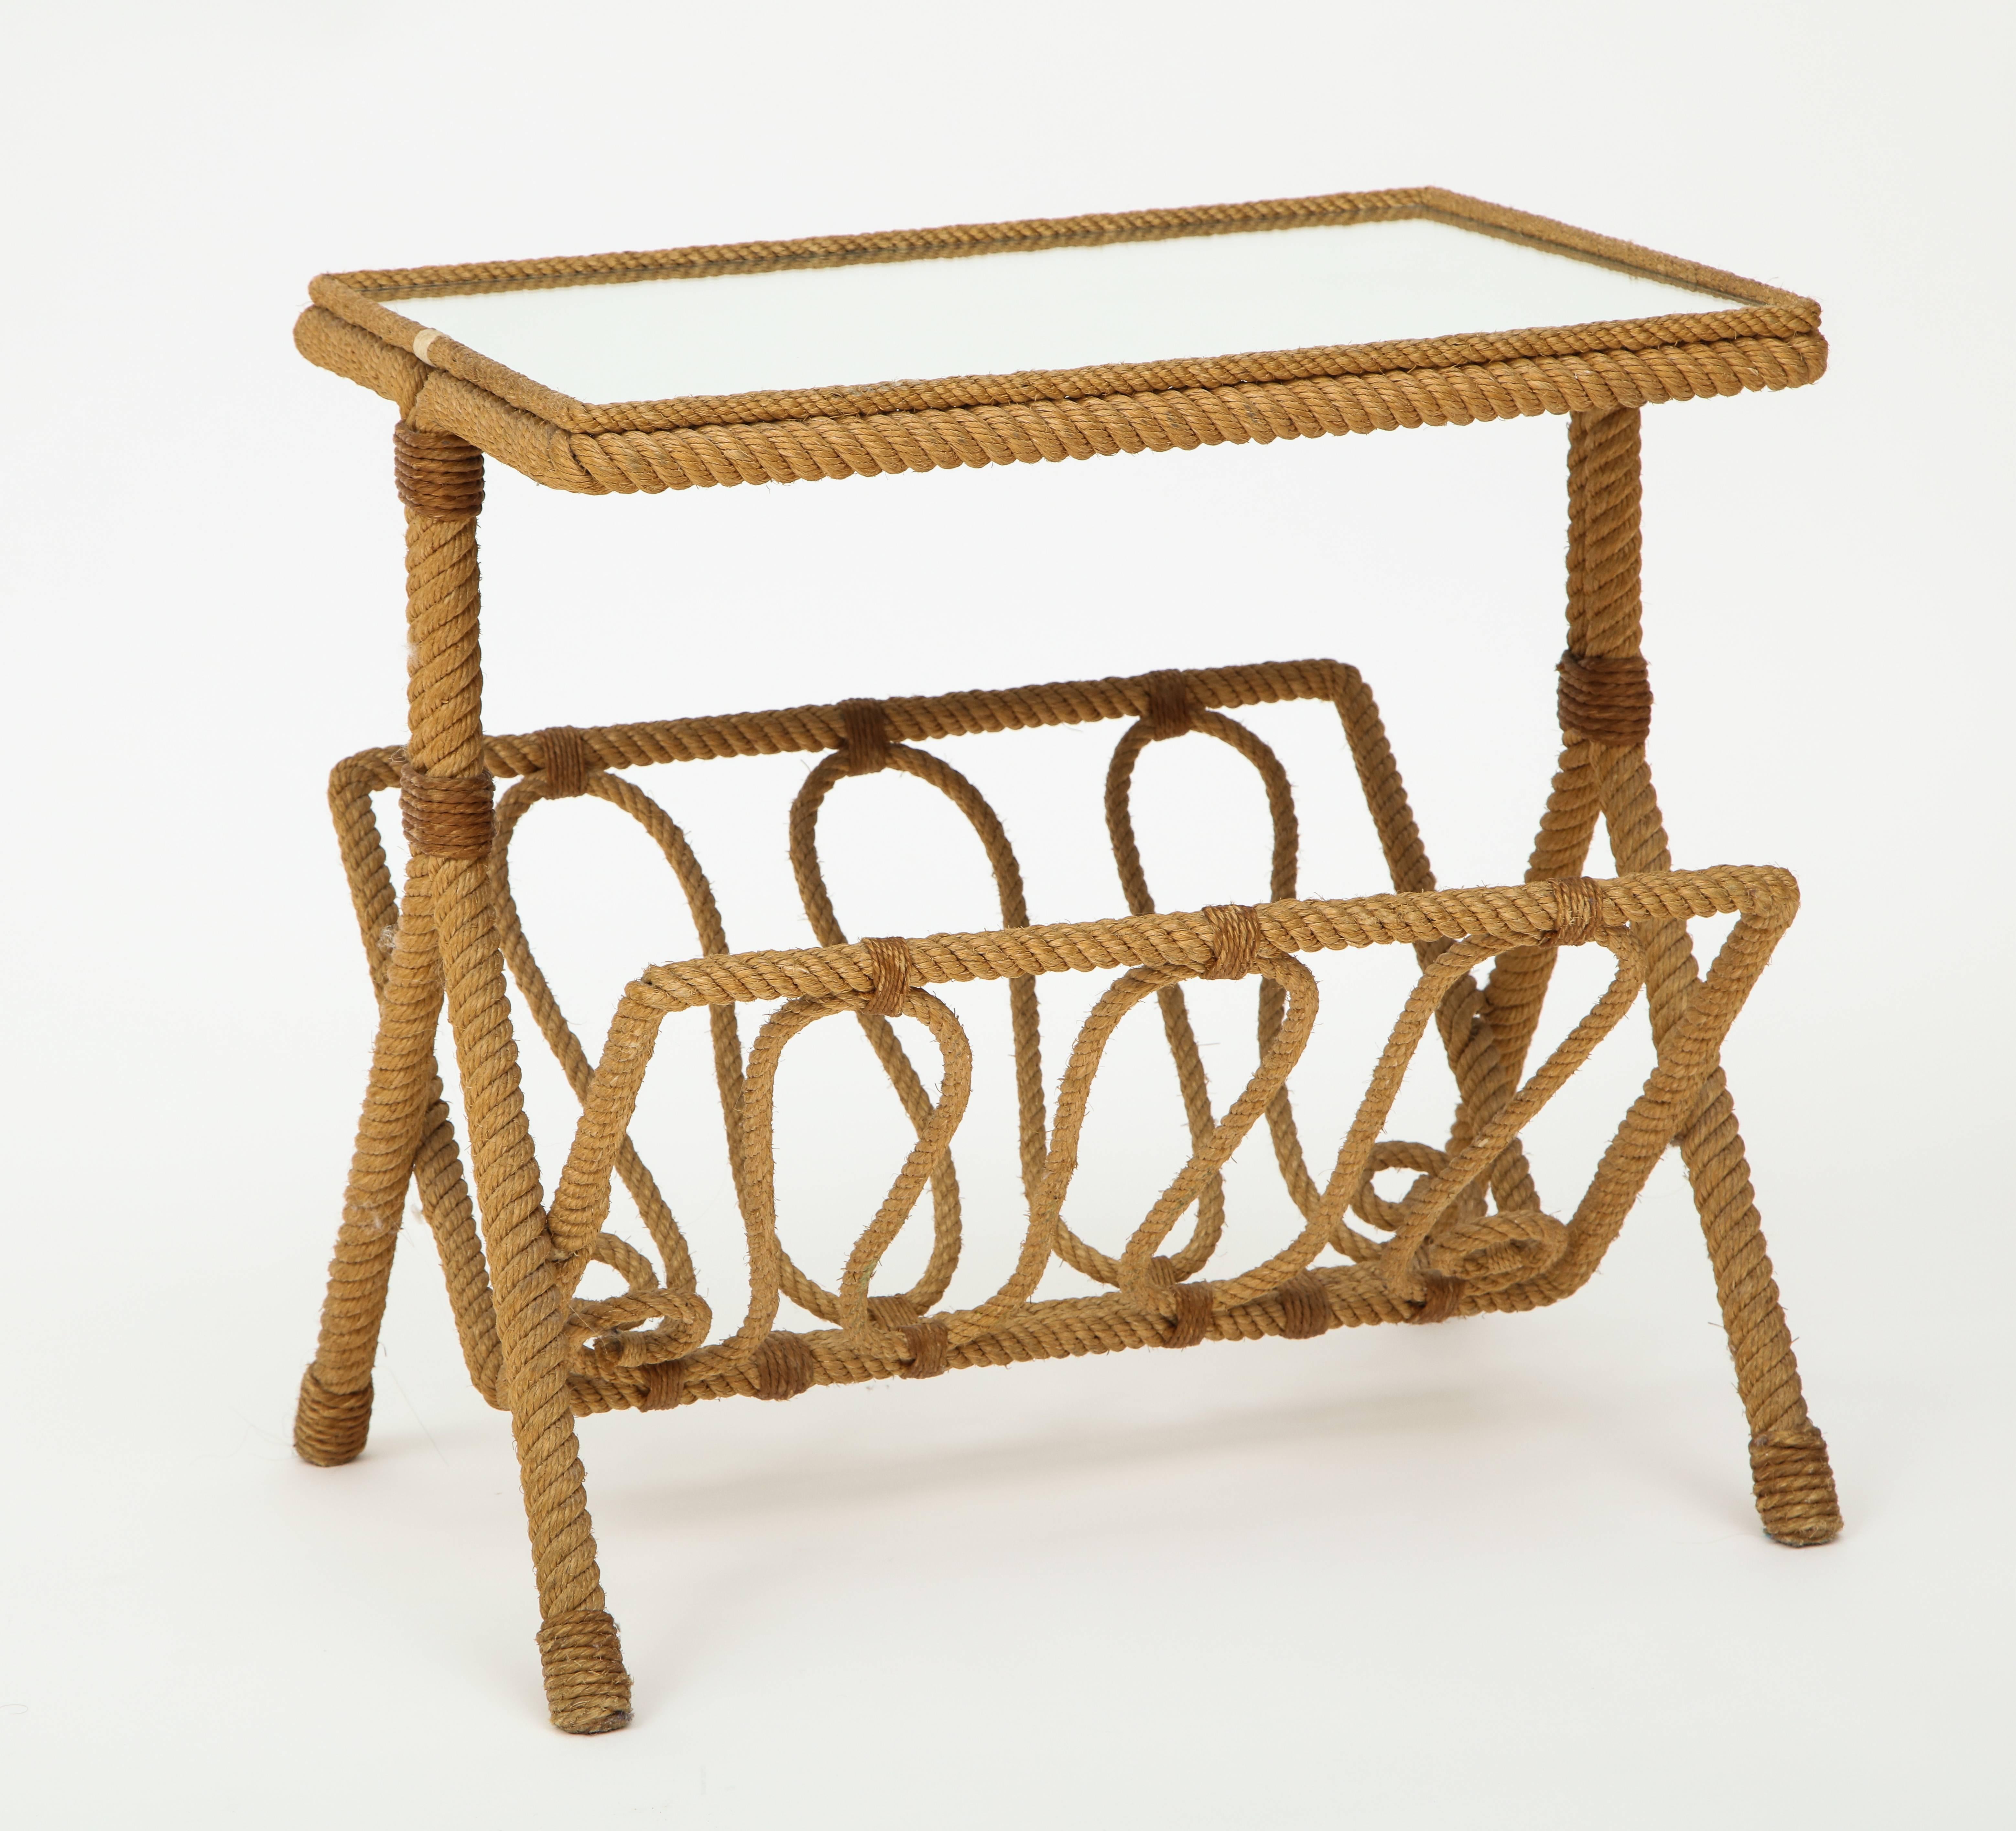 Audoux Minet woven rope table magazine rack mirrored top, France, 1950s

Nice side table with area to hold magazine's or books. Lovely woven cord material. Mirrored glass tabletop.